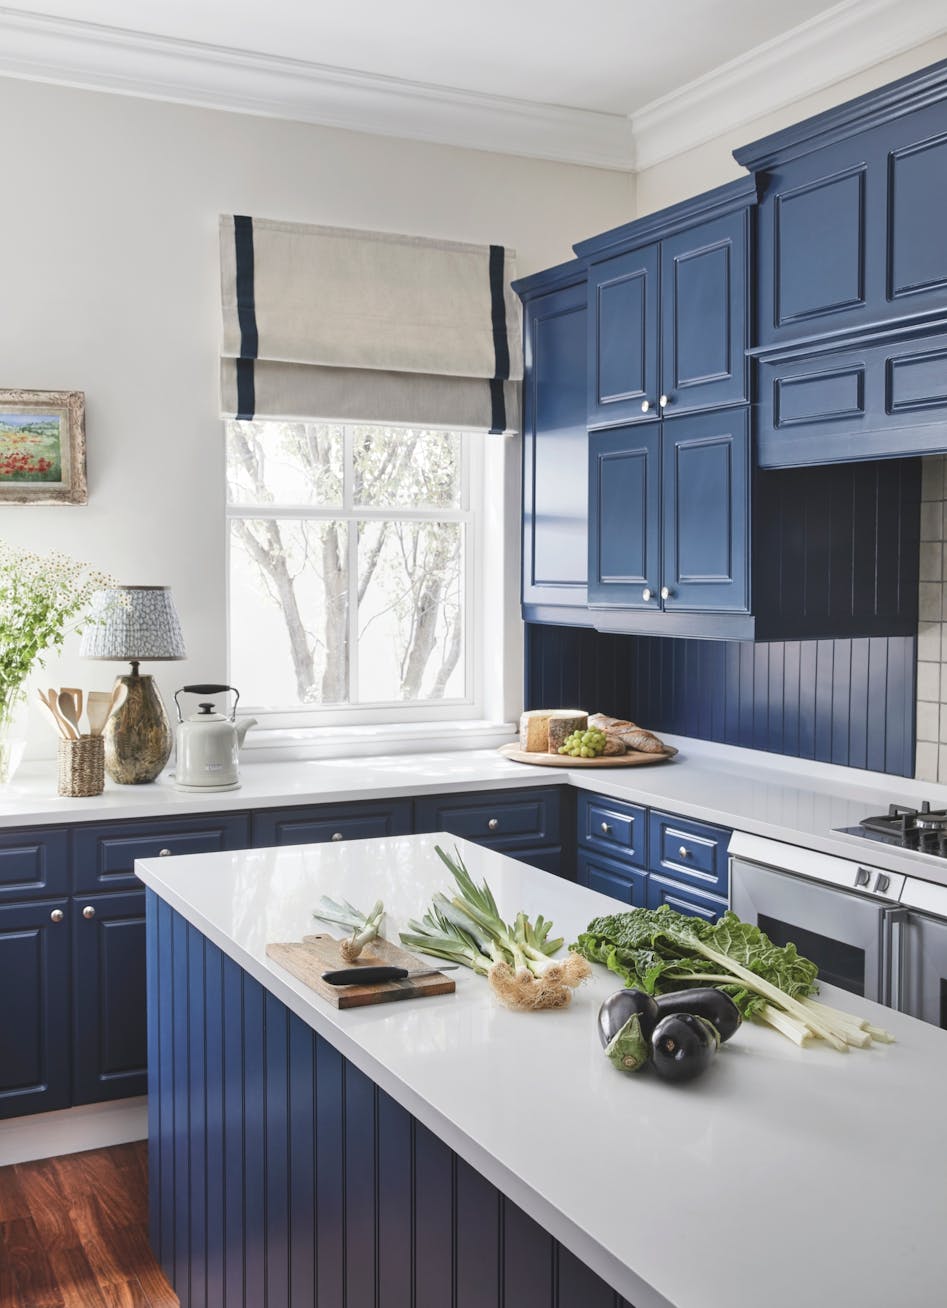 A kitchen with deep blue cabinetry, a window with a view of the trees outside and a kitchen island with vegetables on top.